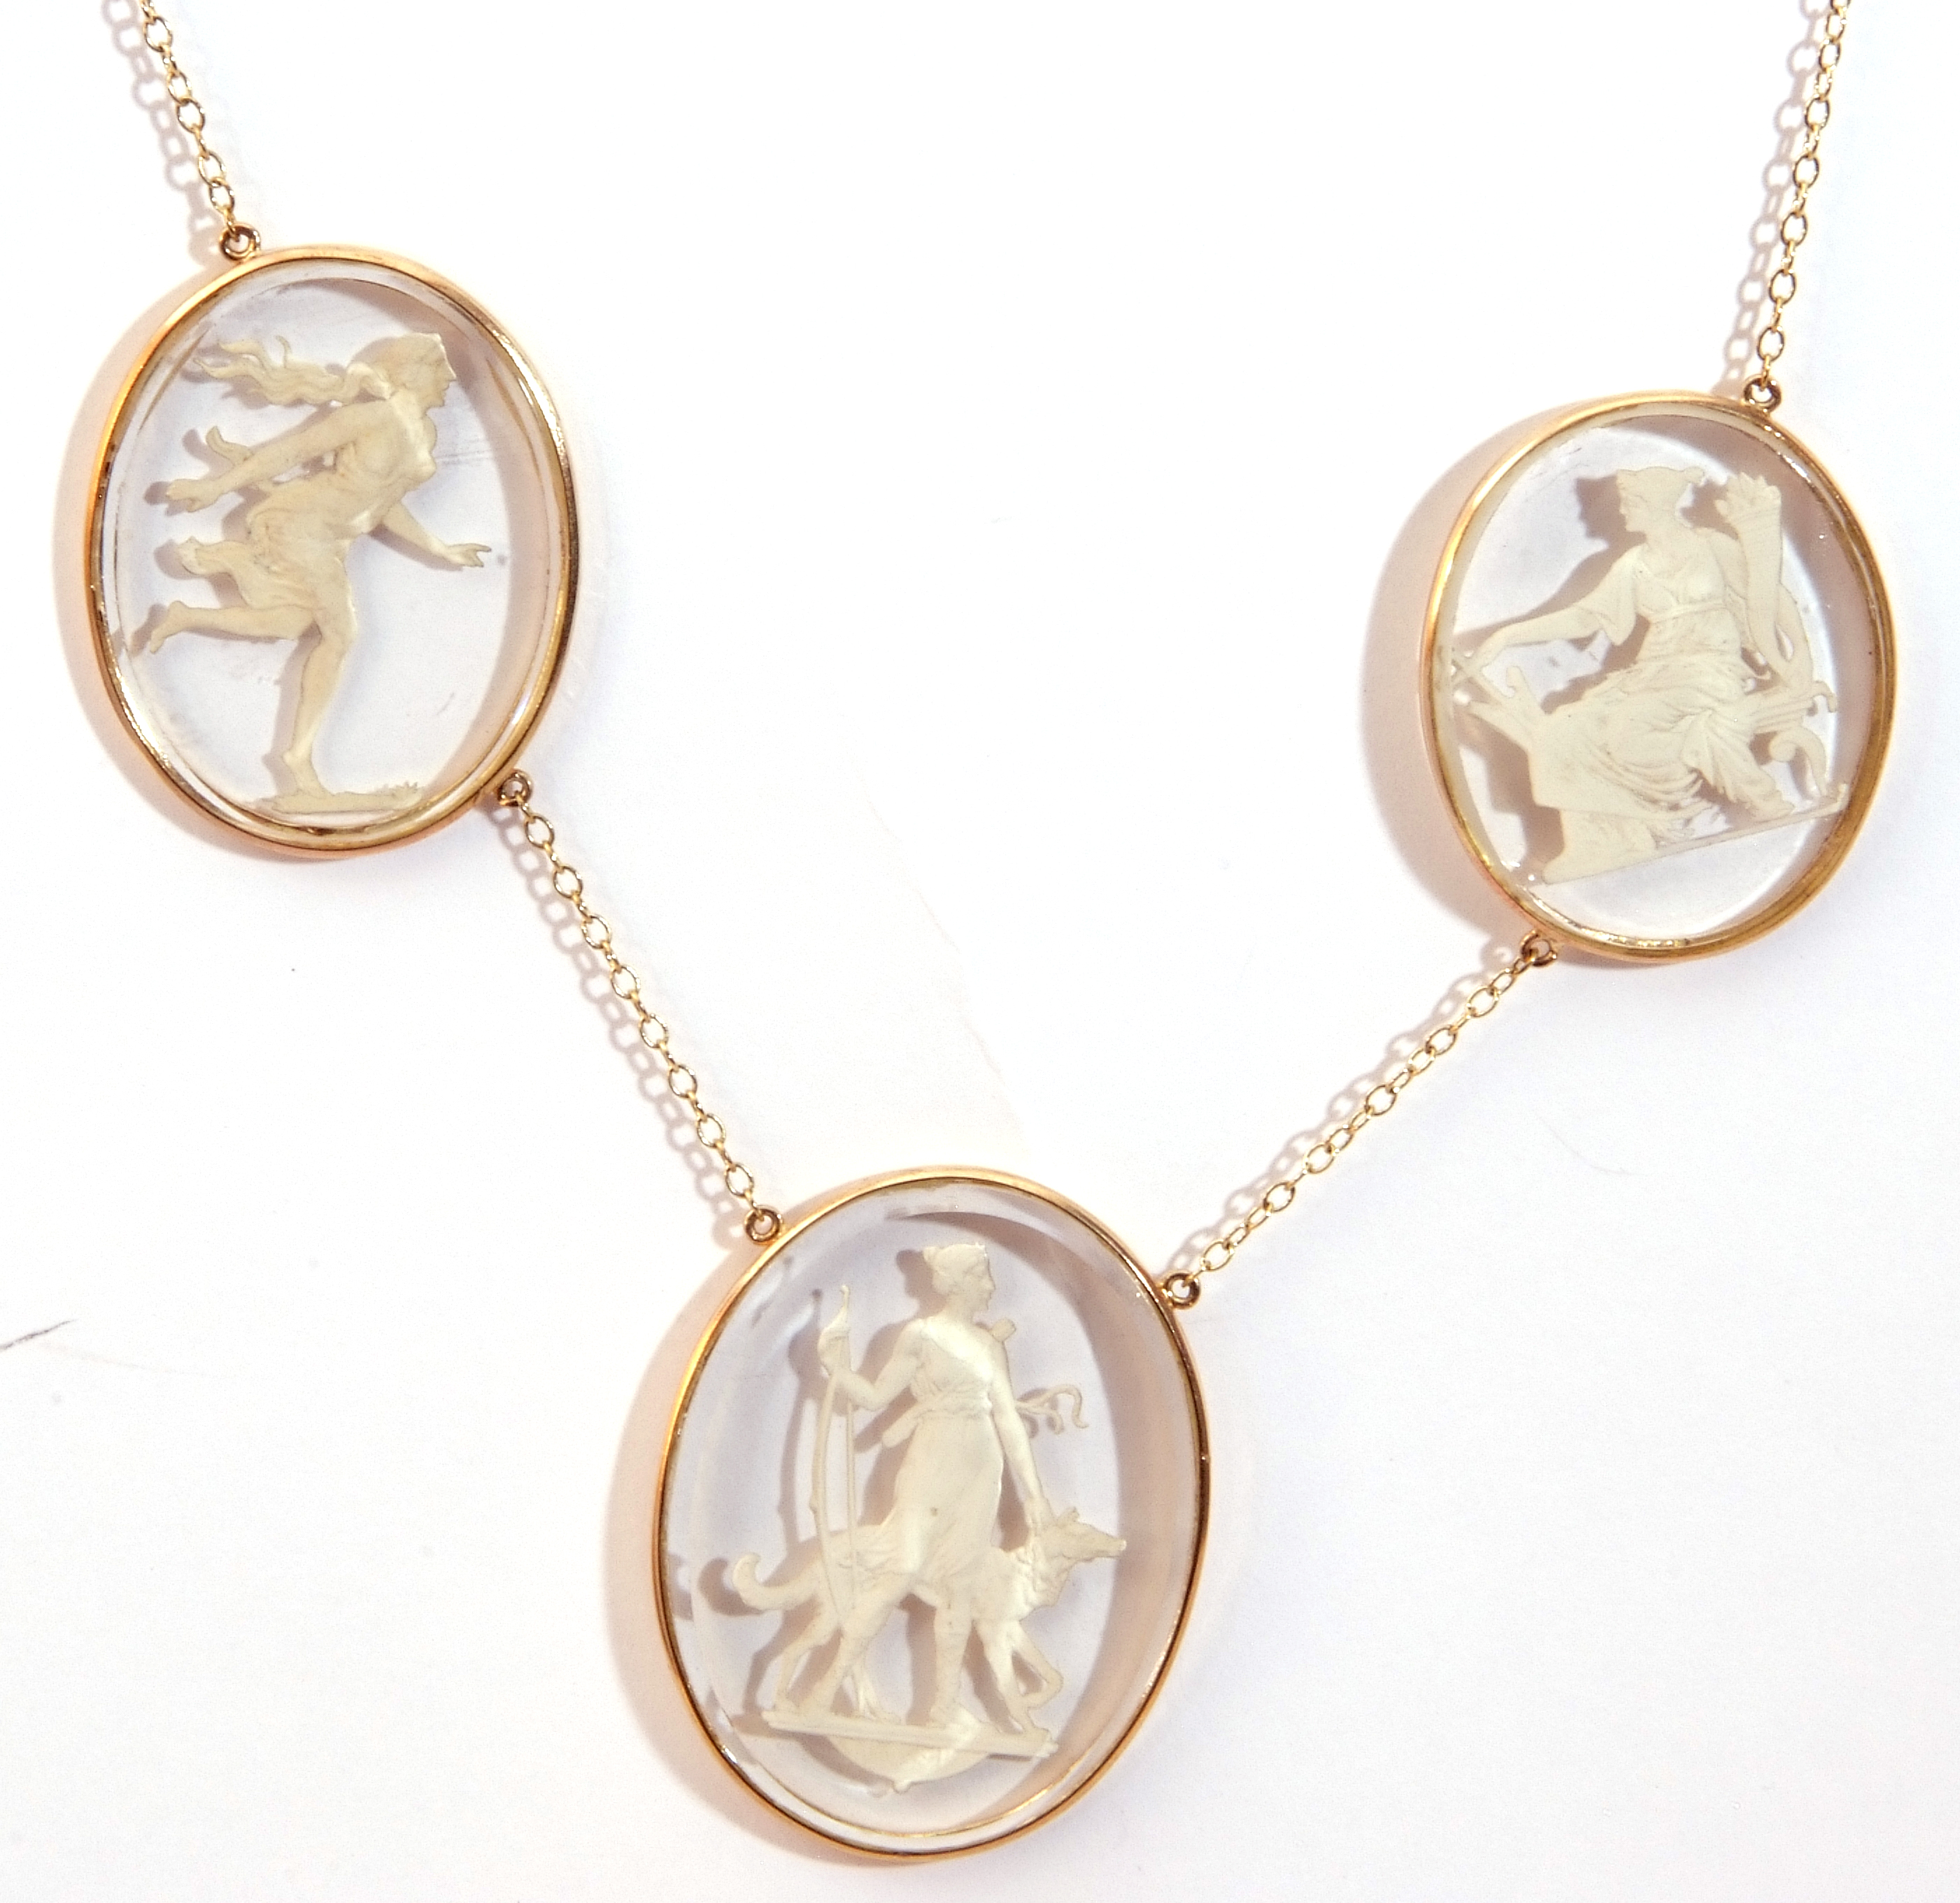 9ct gold glass intaglio necklace featuring 3 graduated glass intaglios depicting classical figures - Image 2 of 2